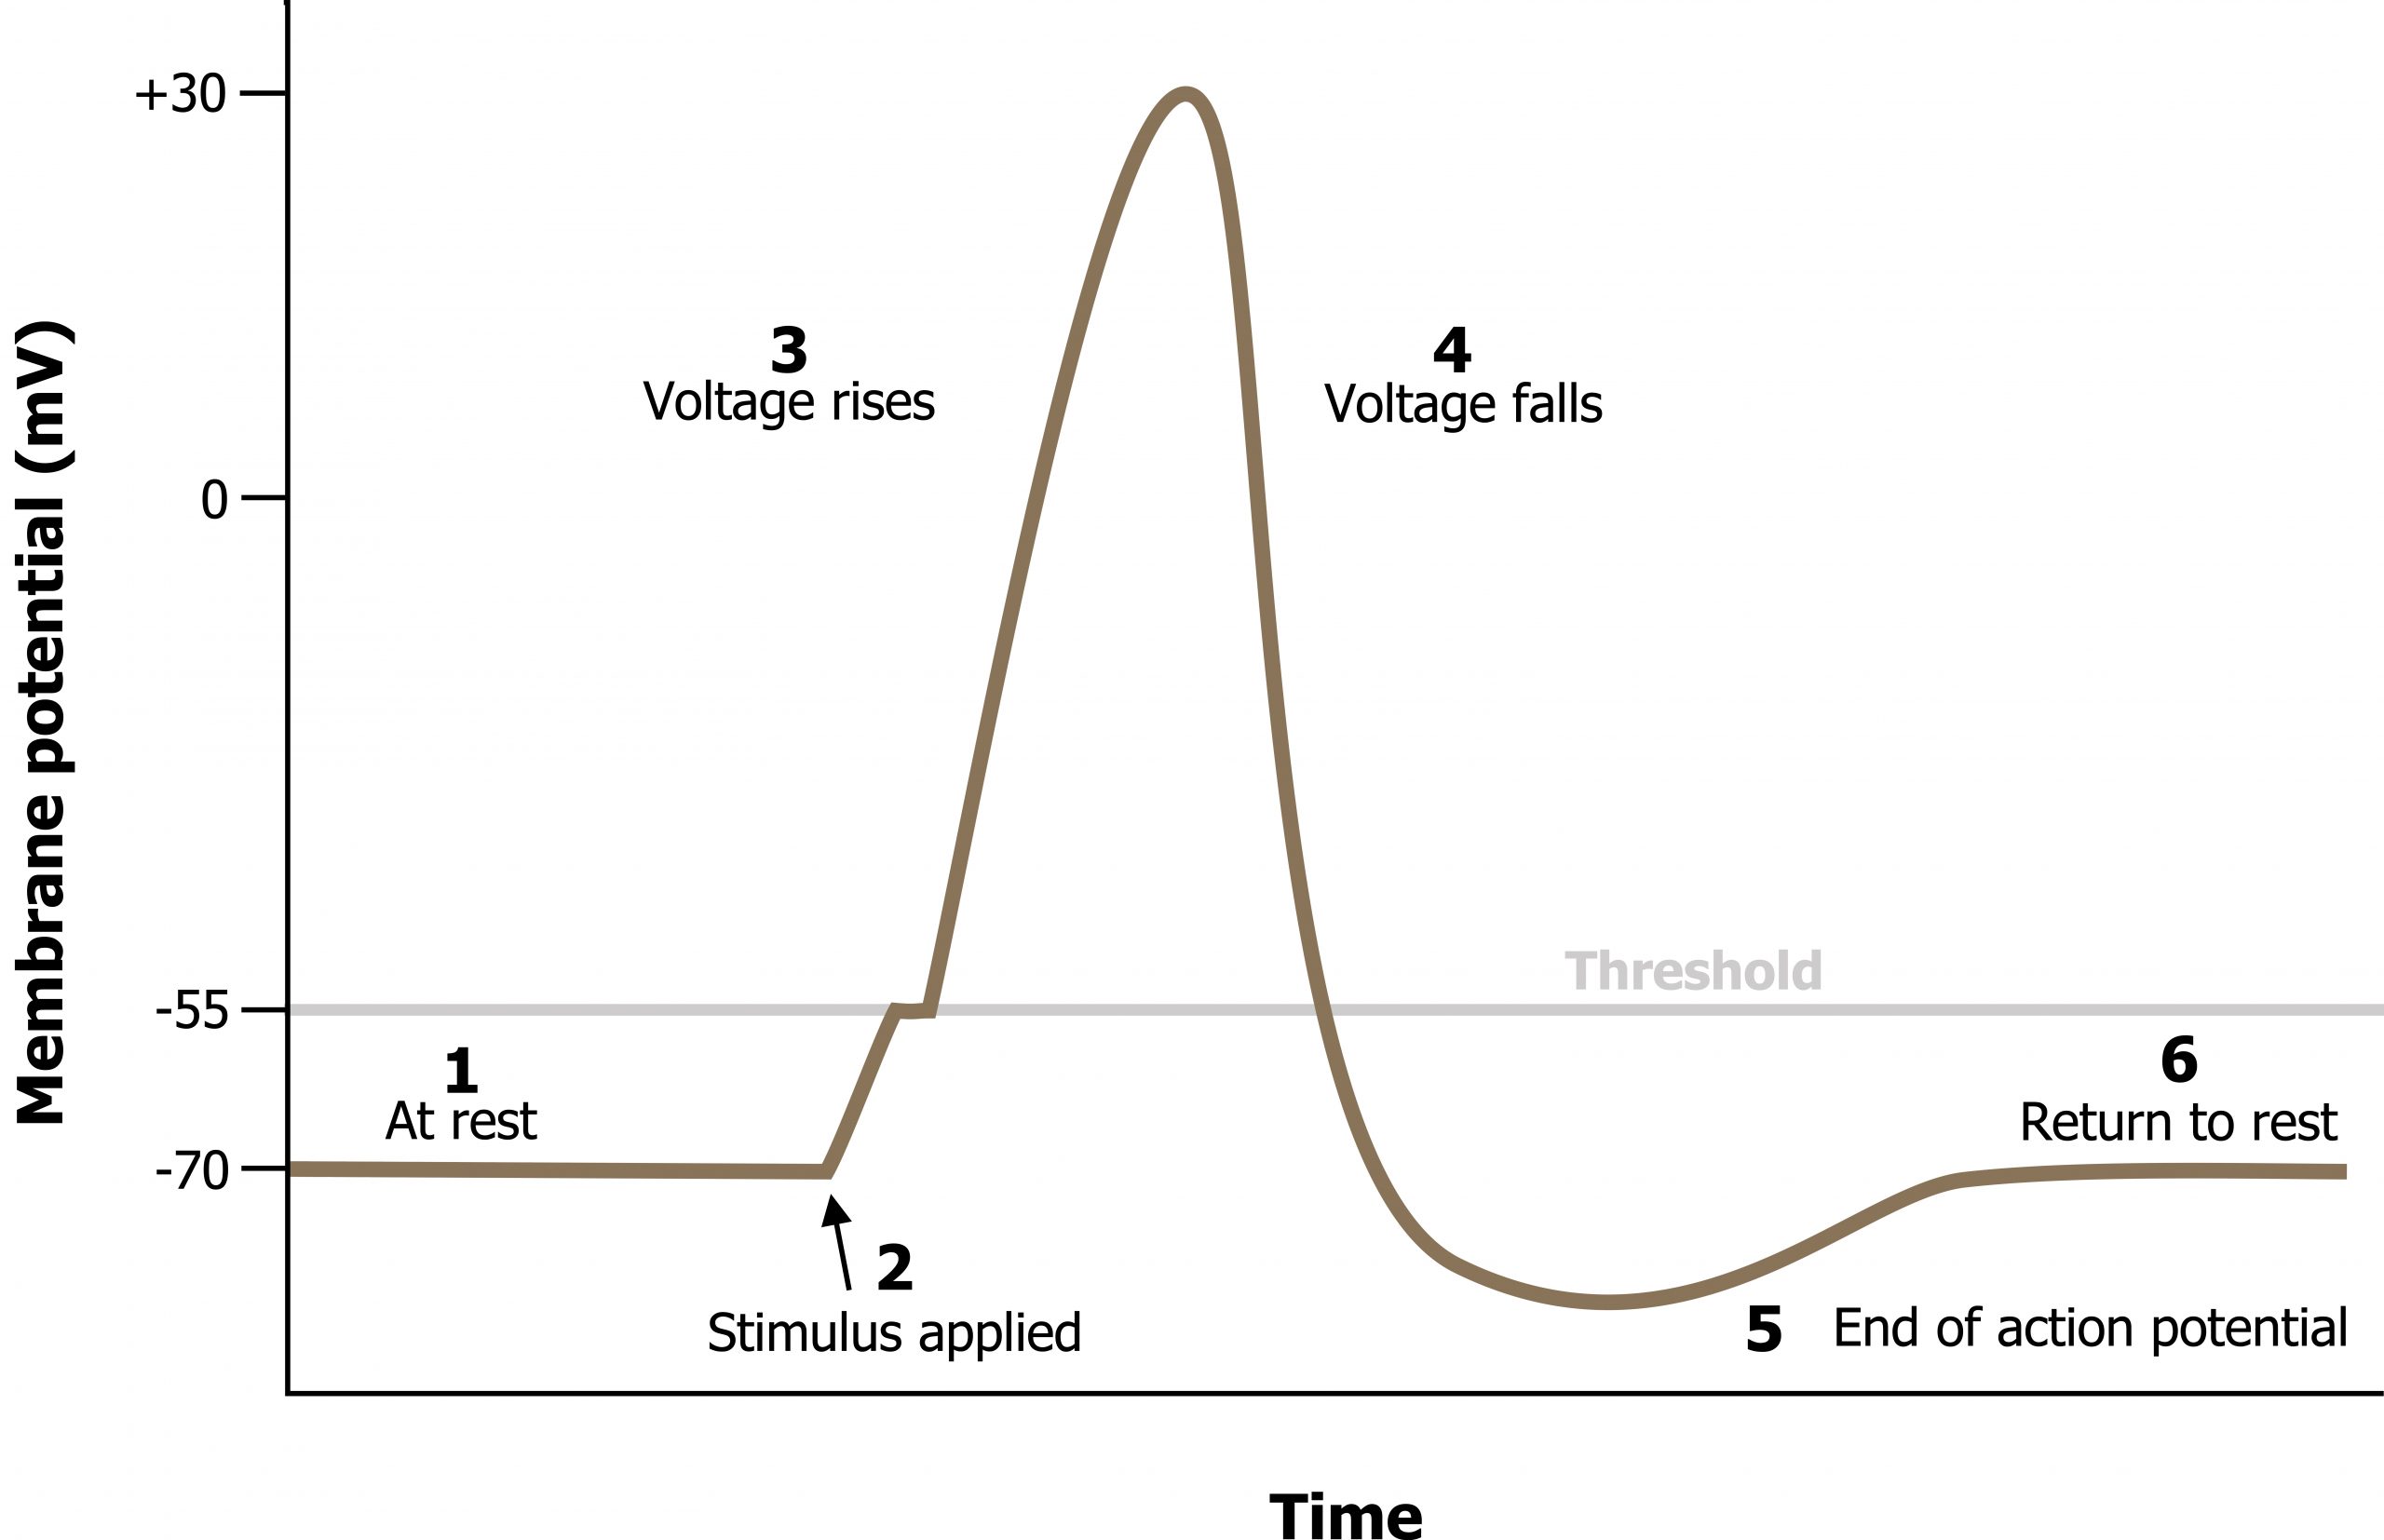 X-axis labeled time and y-axis labeled Membrane potential (mV) with -55 mV labeled threshold. 1 At rest: horizontal line at -70. 2 Stimulus applied: line raises to -55. 3 Voltage rises: line peaks at +30. 4 Voltage falls: line drops to -90. 5 end of action potential: line rises. 6 return to rest: horizontal line at -70.